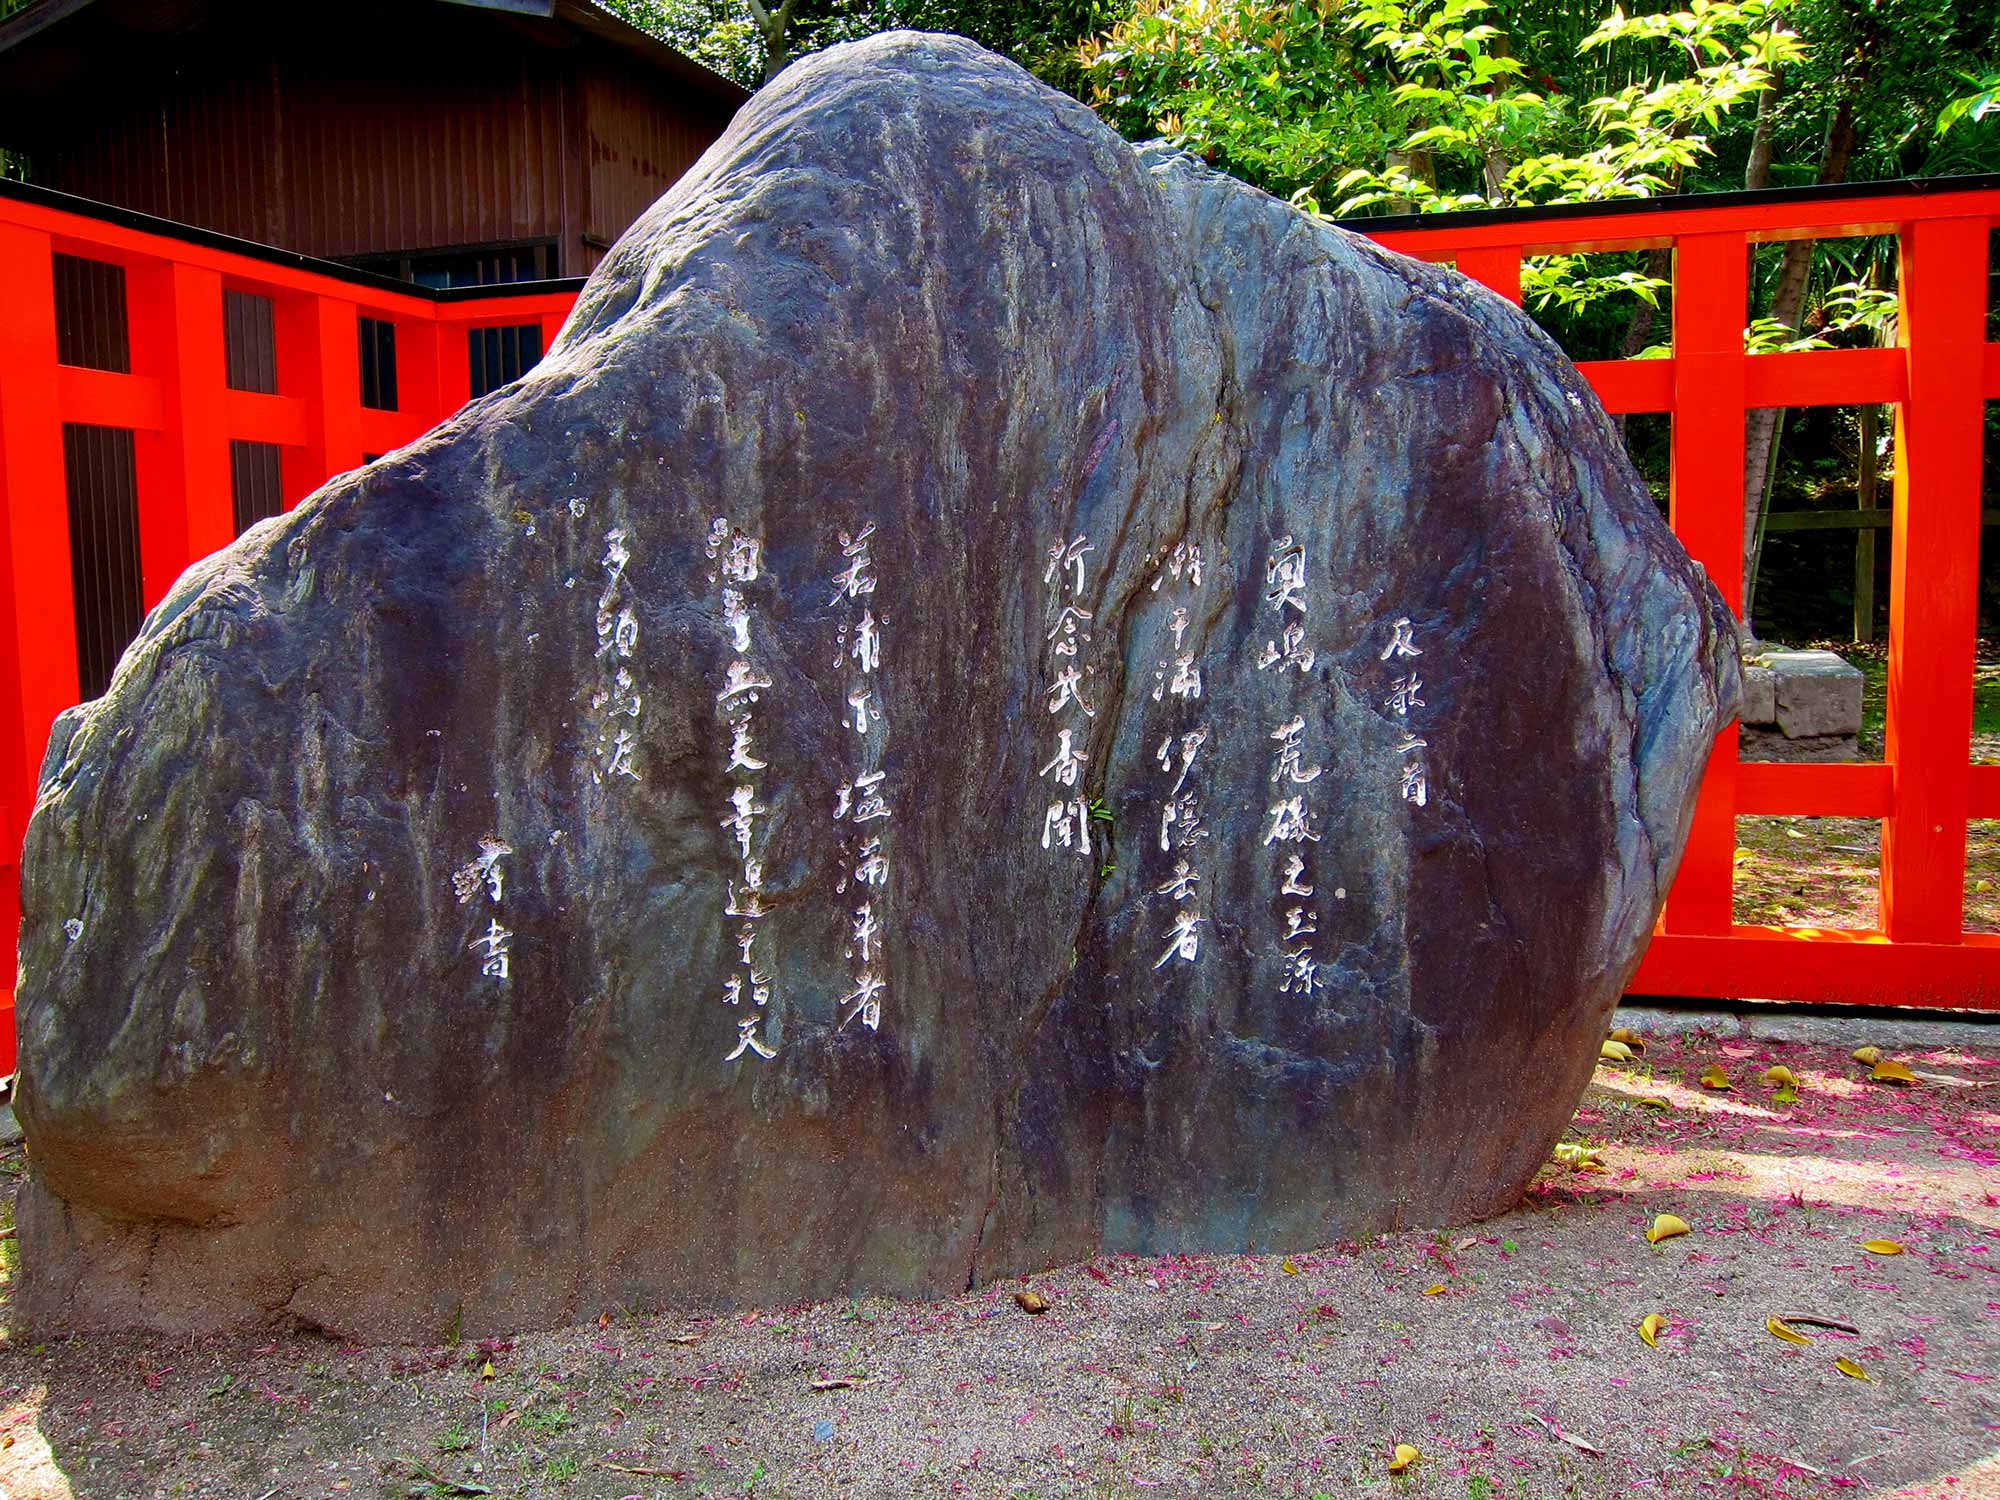 This stone is inscribed with a tanka poem of Akahito Yamabenoの写真